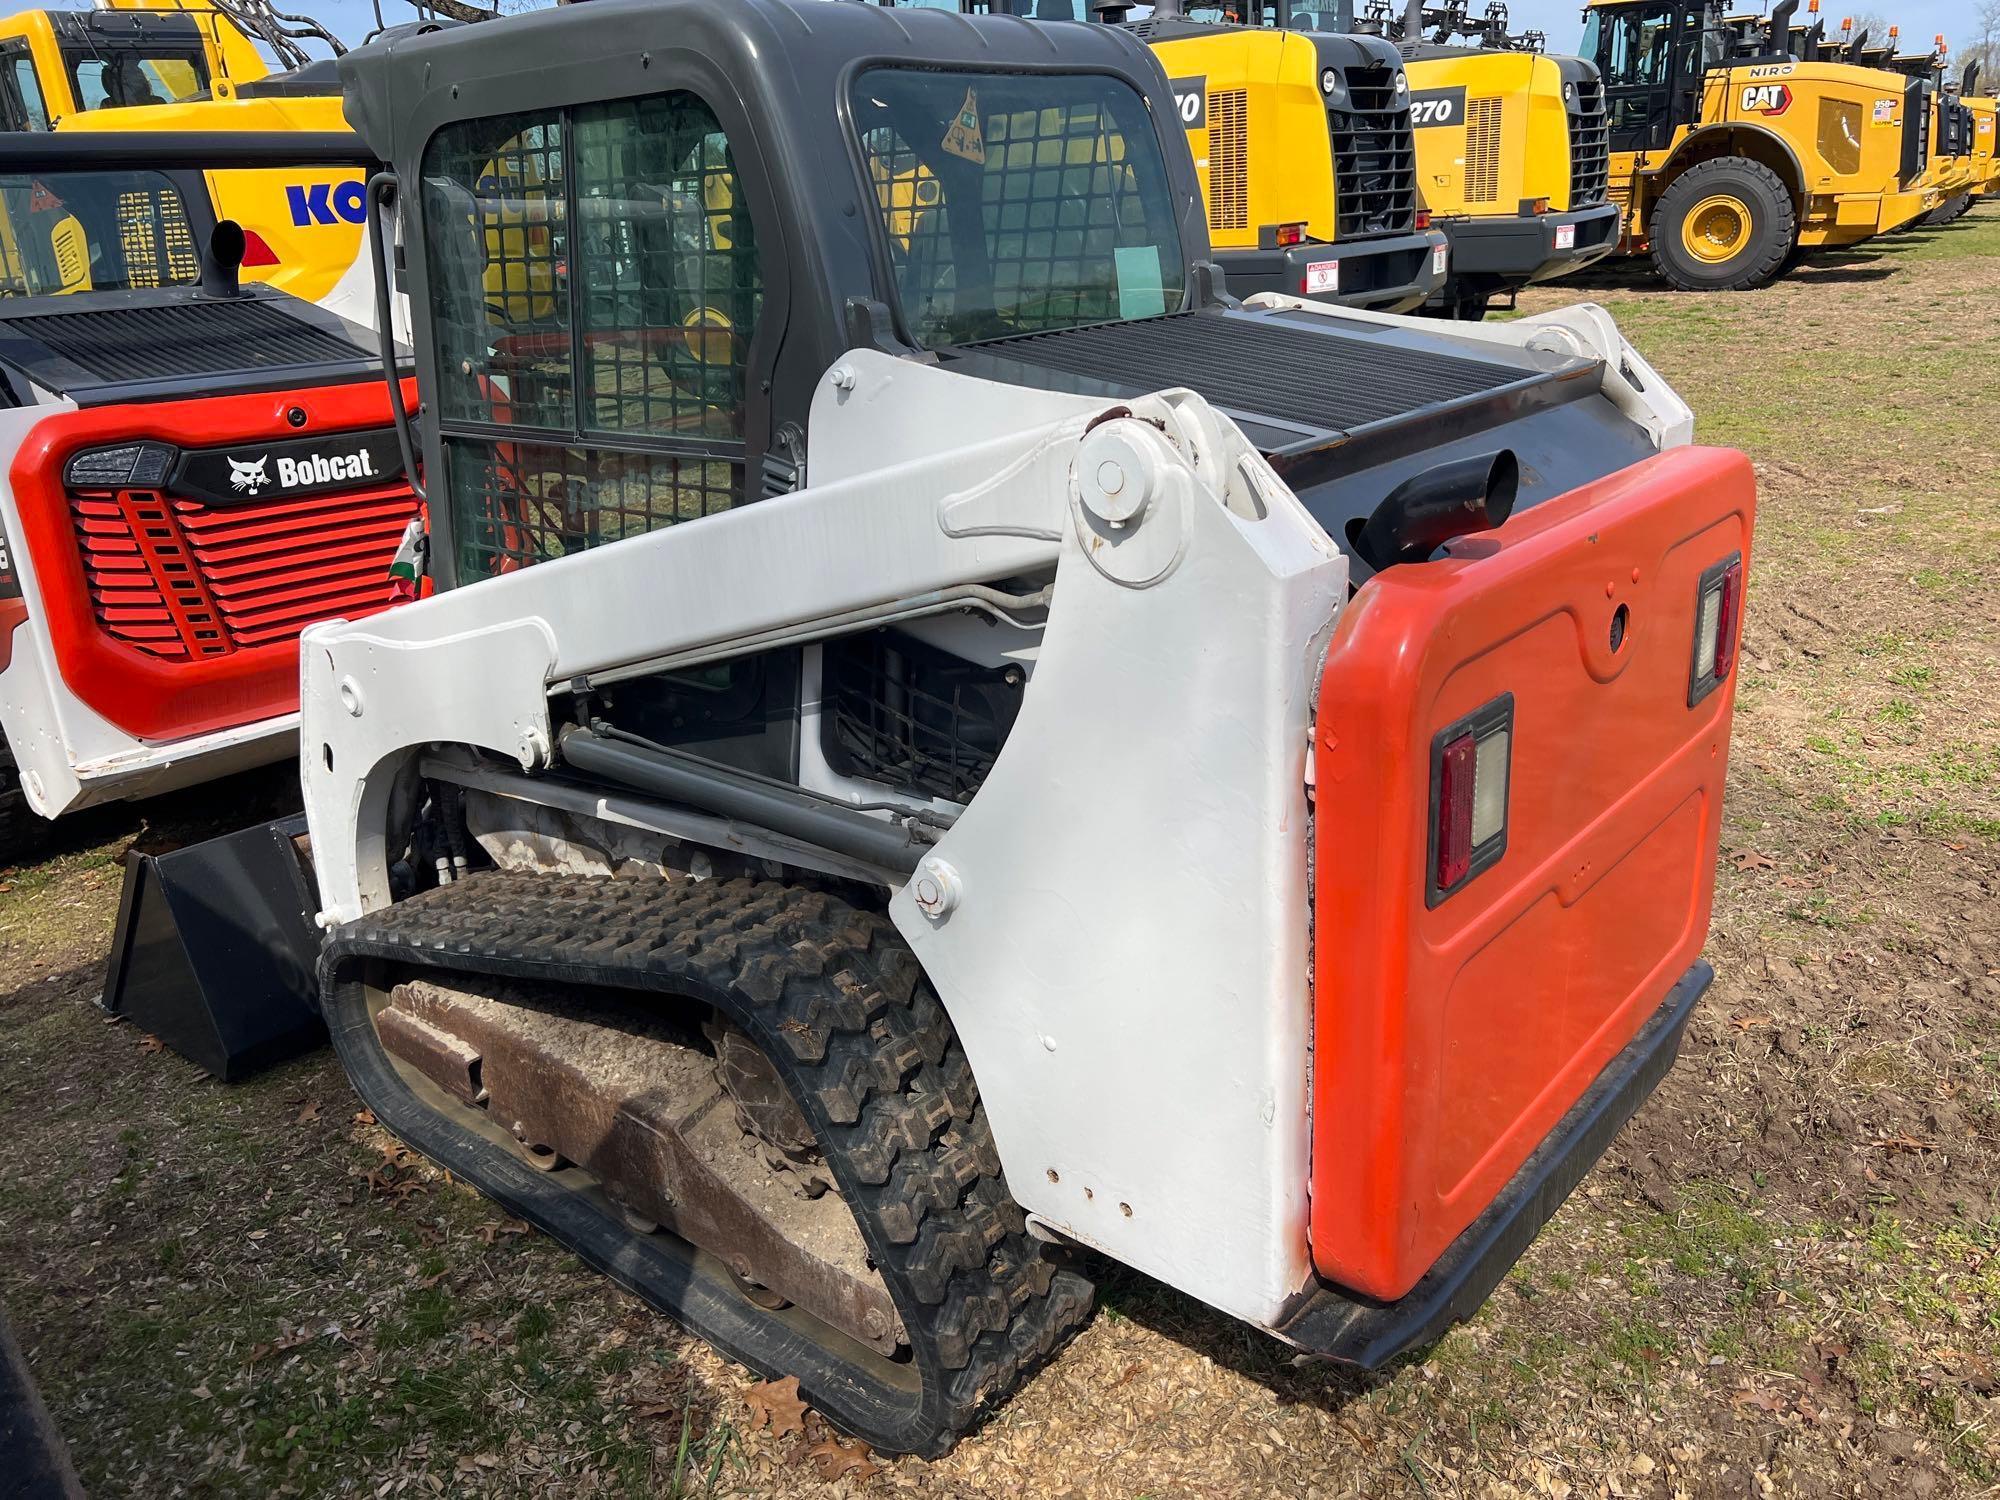 2016 BOBCAT T450 RUBBER TRACKED SKID STEER SN:AUVP12884 powered by diesel engine, equipped with